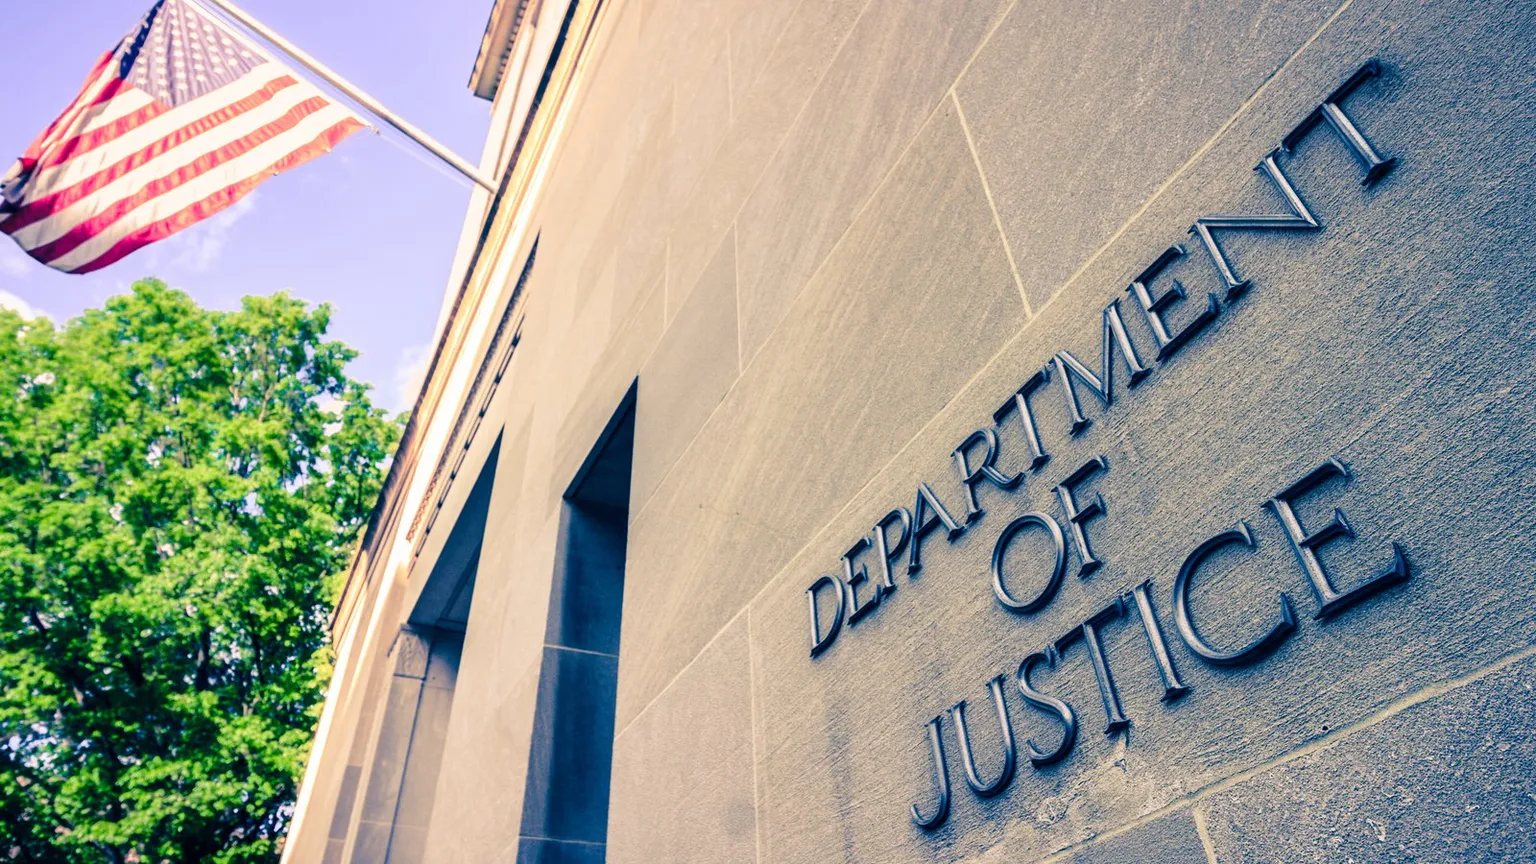 Department of Justice. Image: Shutterstock